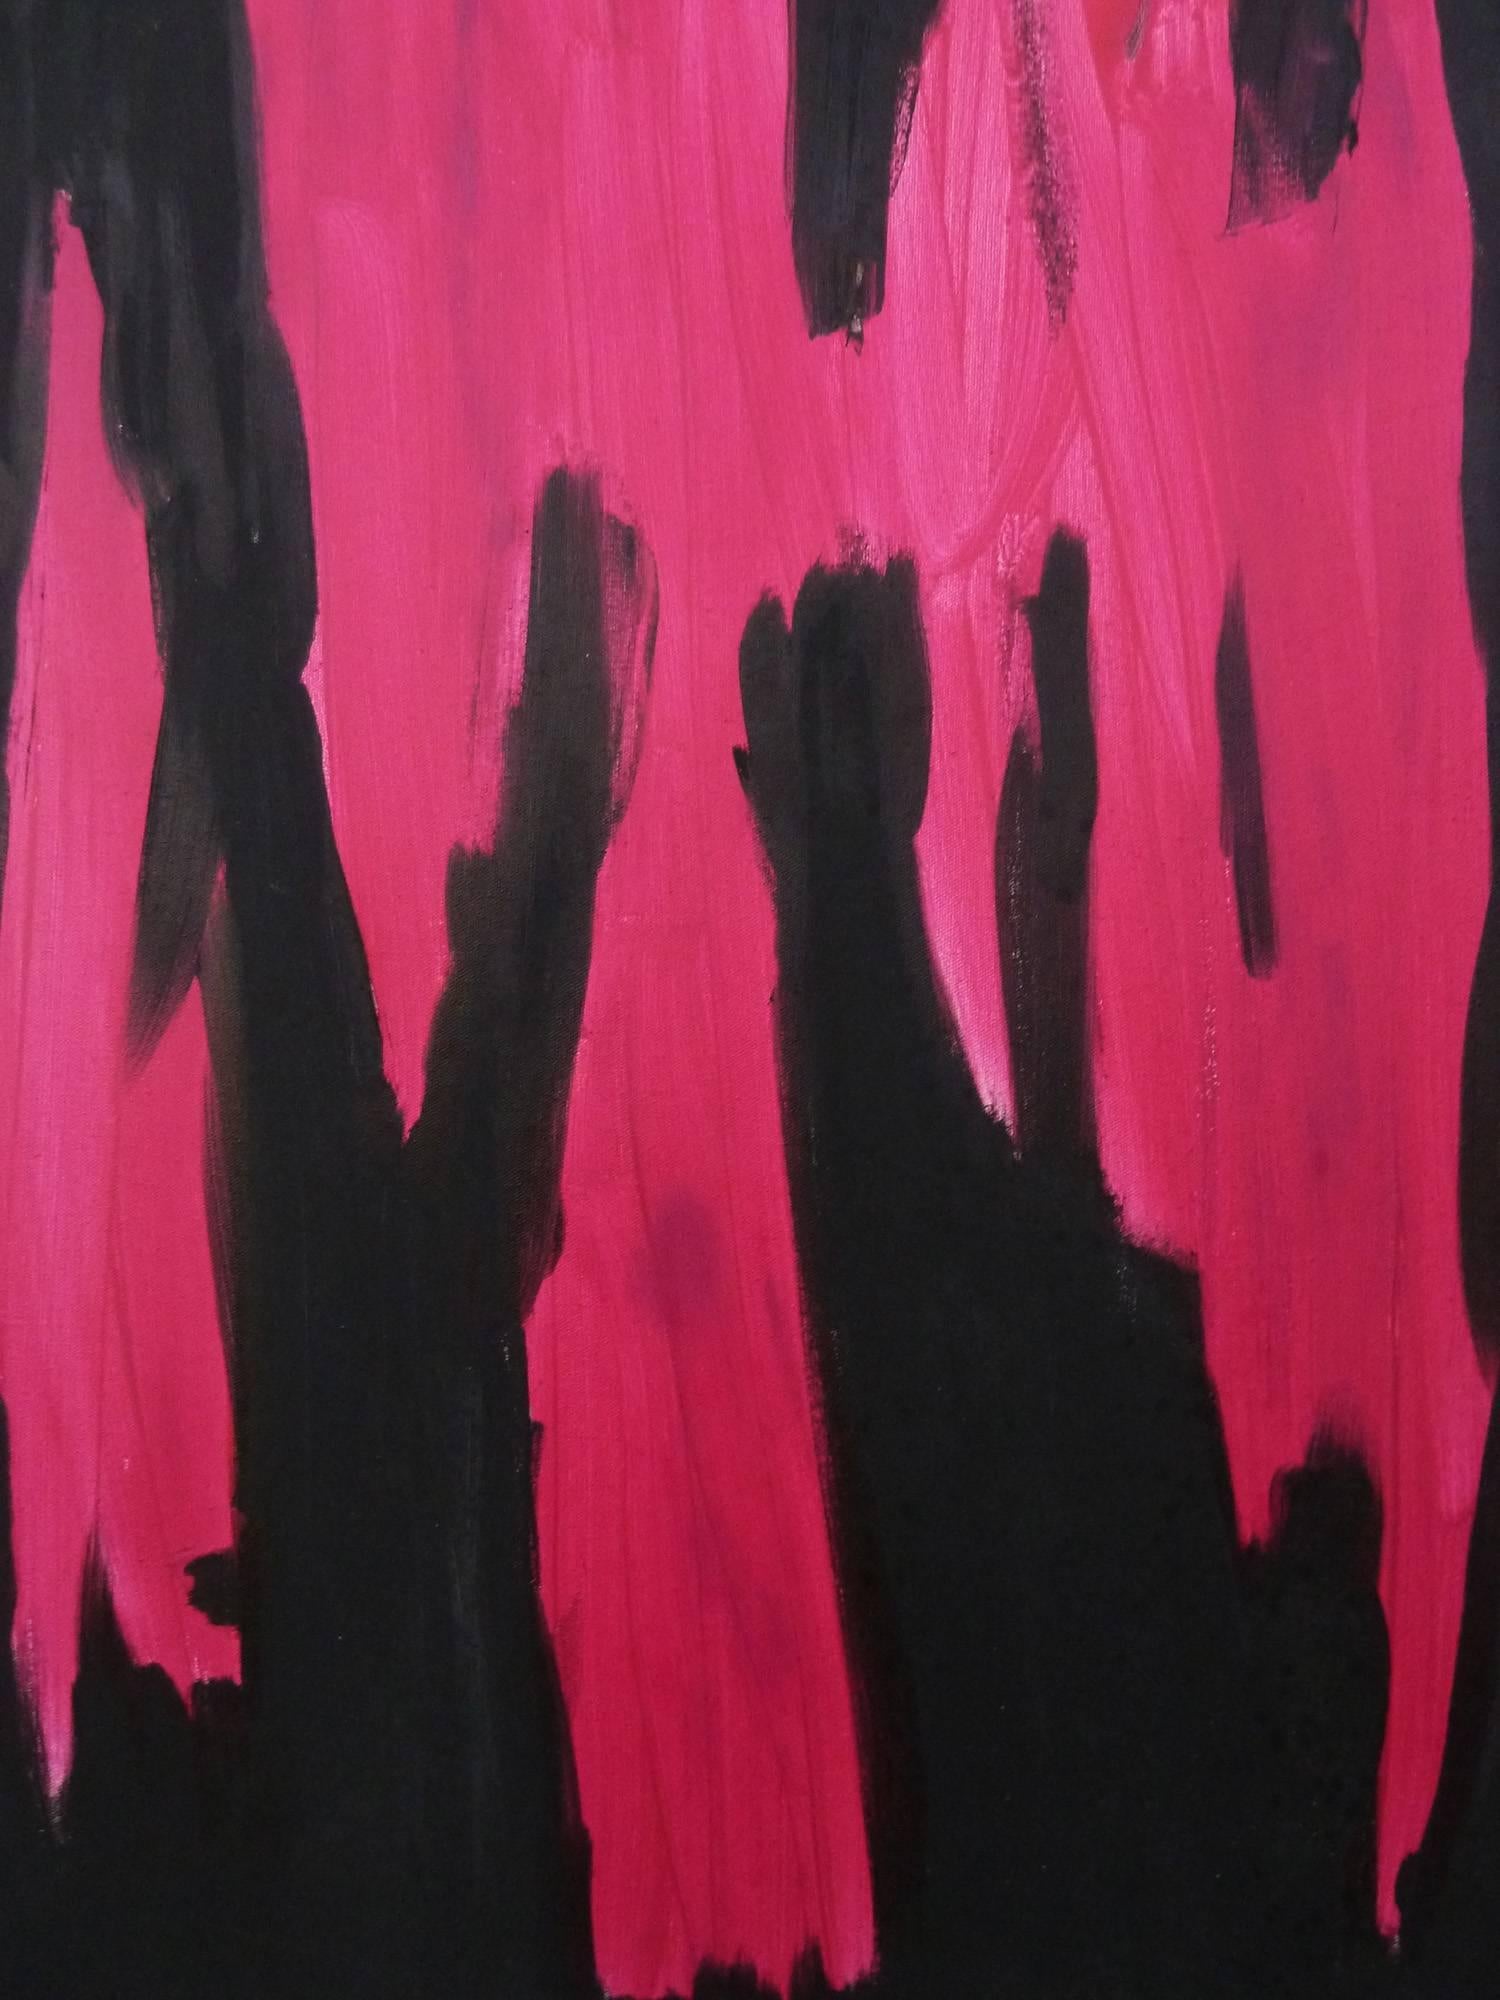 Mid-Century Modern Fuschia and Black Abstract Painting by Mert Miripolsky